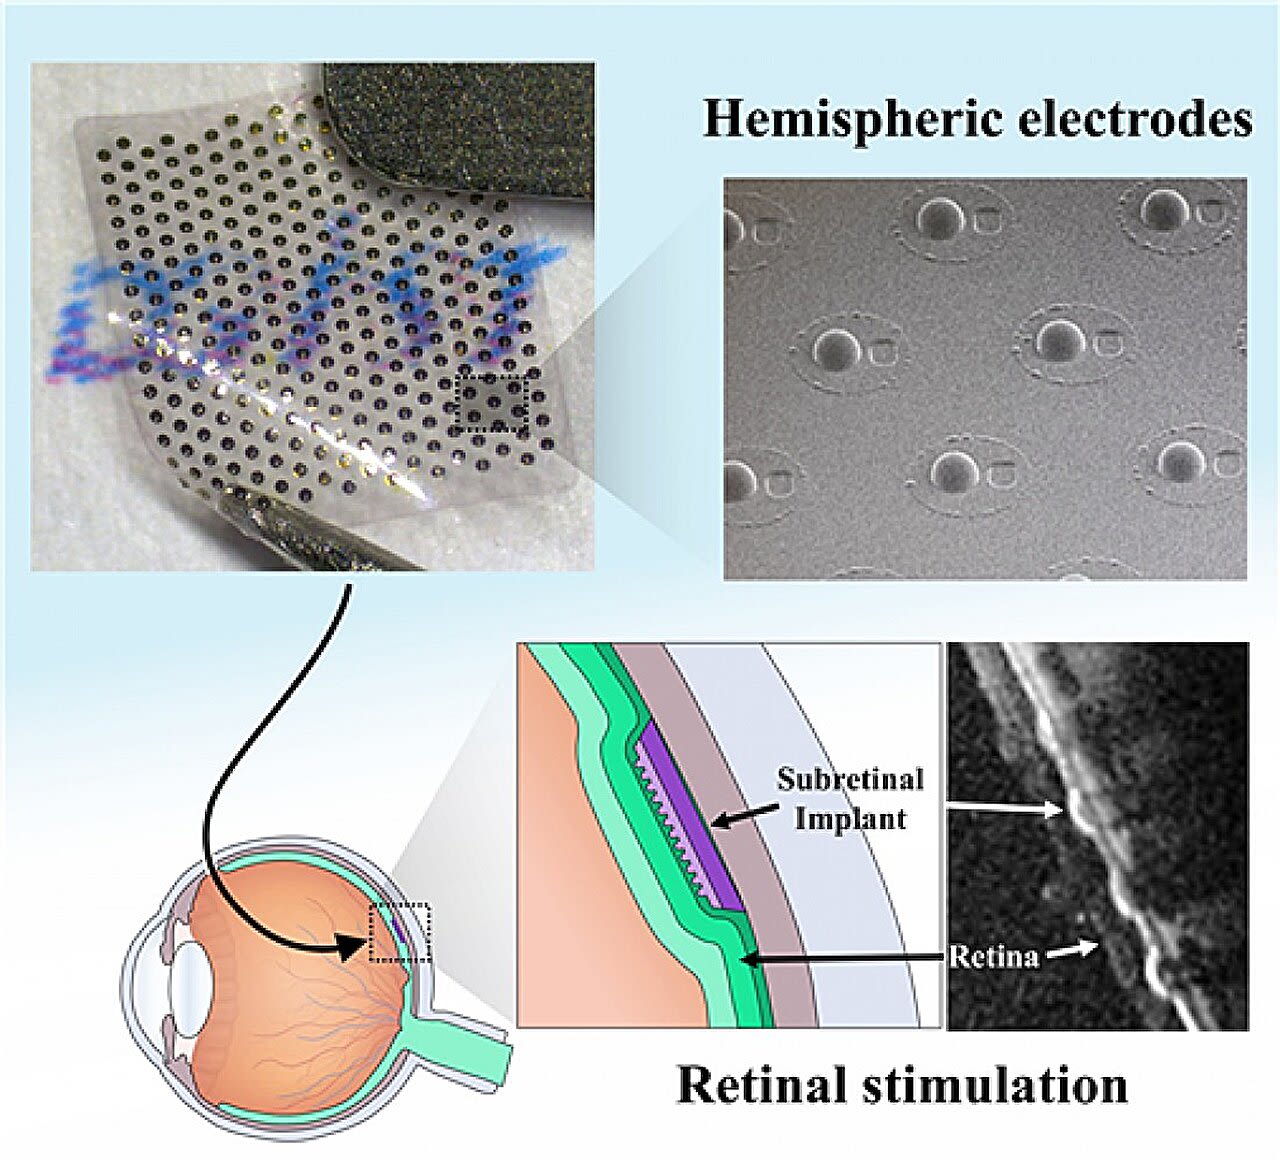 Three-dimensional retinal electrodes in a convex Braille shape partially restore sight